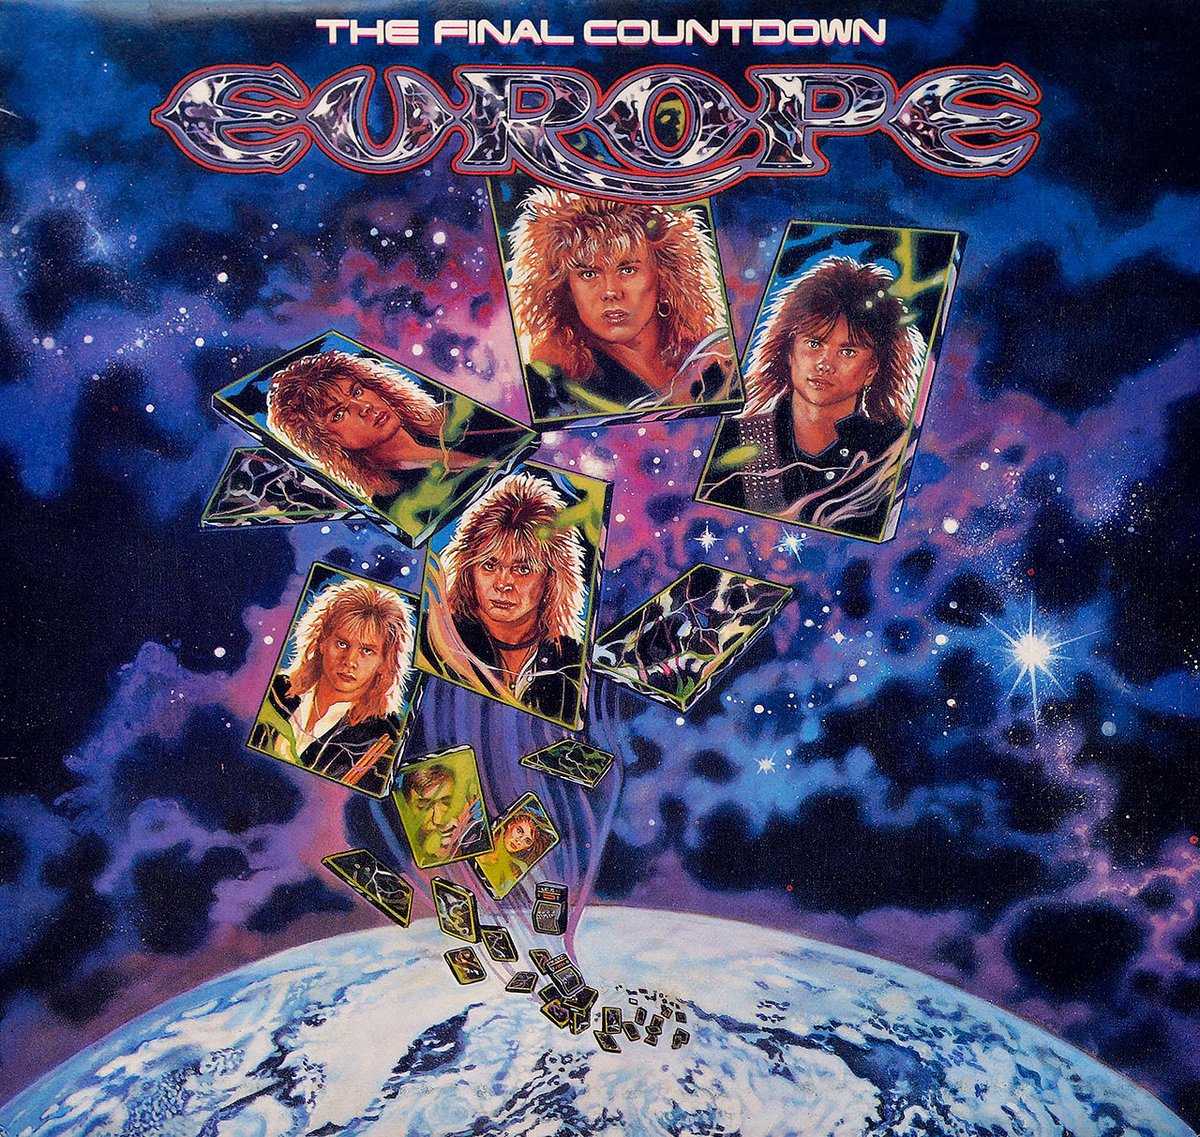 'The Final Countdown', the 3rd studio album by Swedish band Europe was released today in 1986. The album was a huge success around the world selling more than 15M copies and included hit singles 'The Final Countdown' and power ballad 'Carrie'. #80s #80smusic #1980s